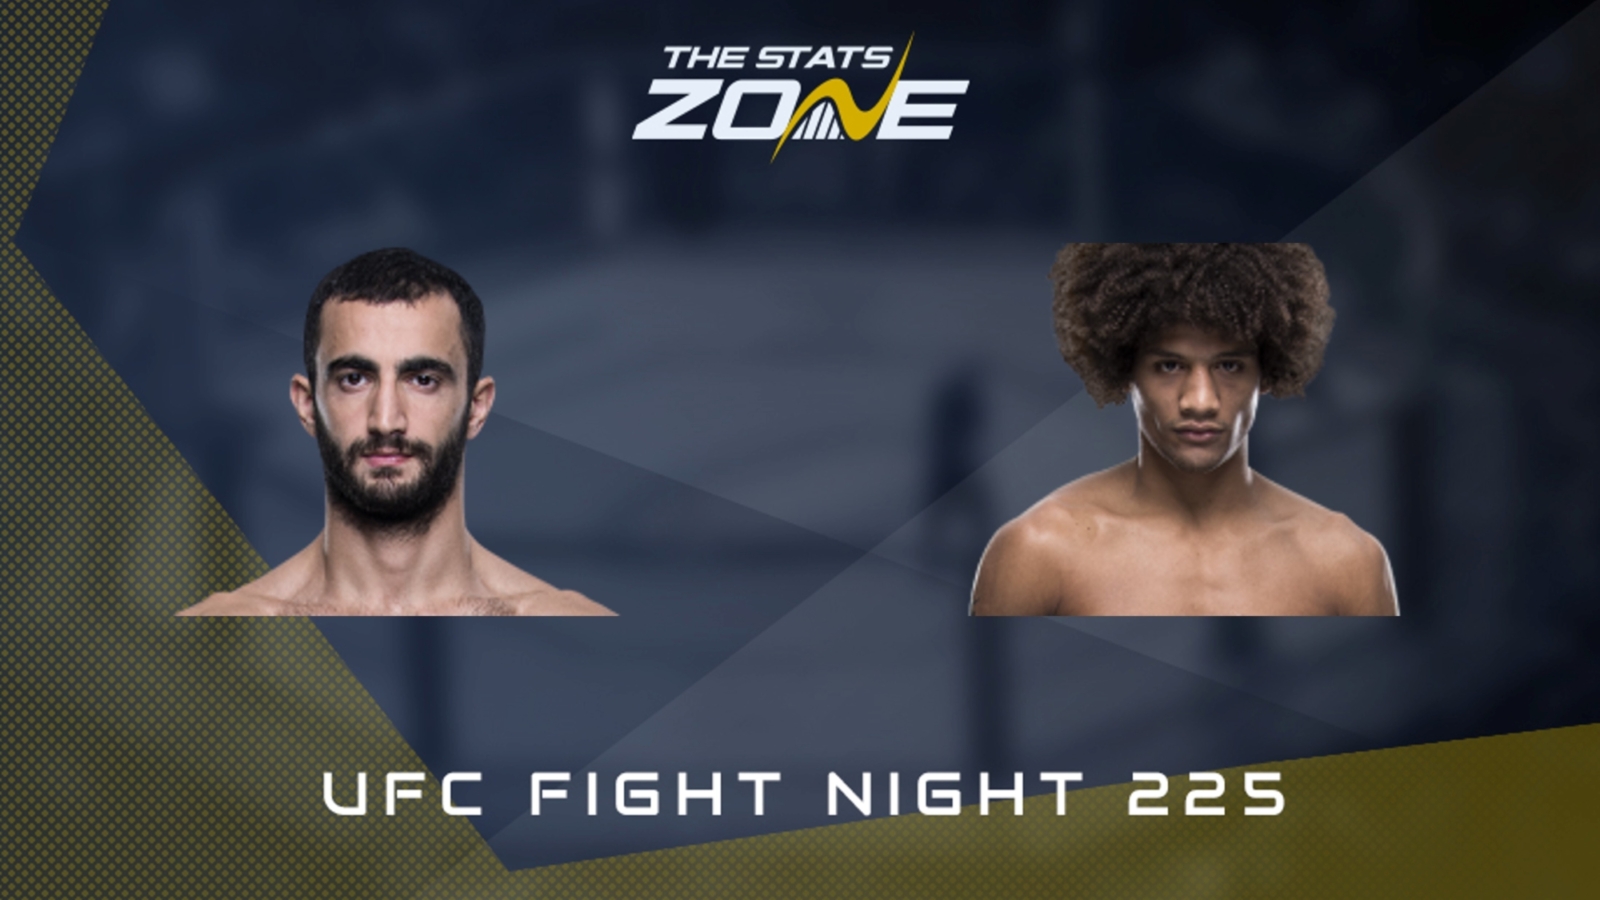 Giga Chikadze vs Alex Caceres start time, undercard, TV channel and streaming info for UFC Fight Night 225